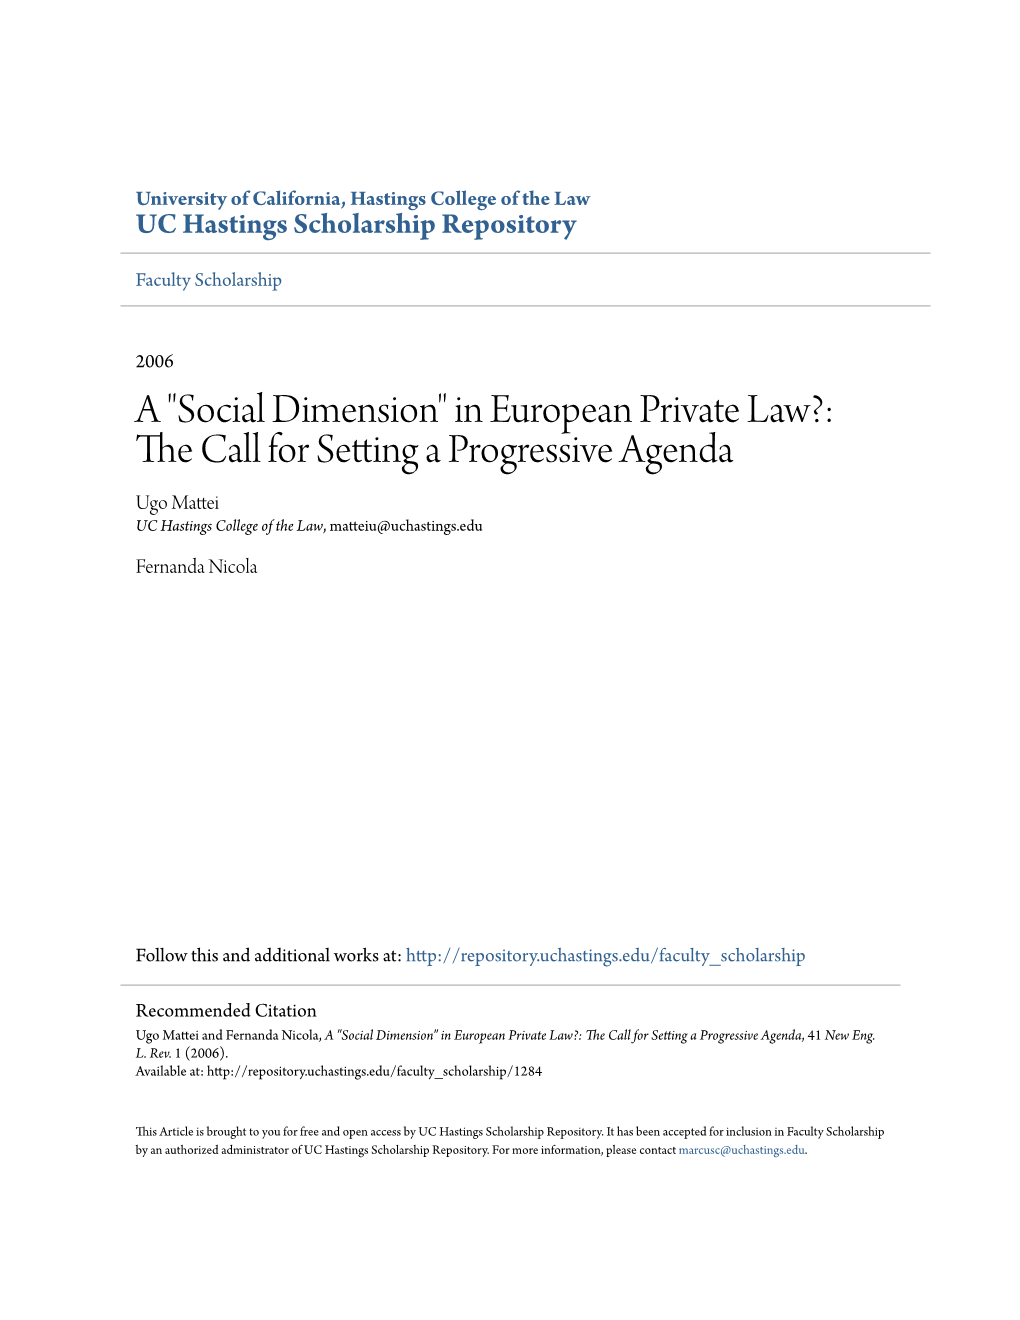 A "Social Dimension" in European Private Law?: the Call for Setting a Progressive Agenda, 41 New Eng